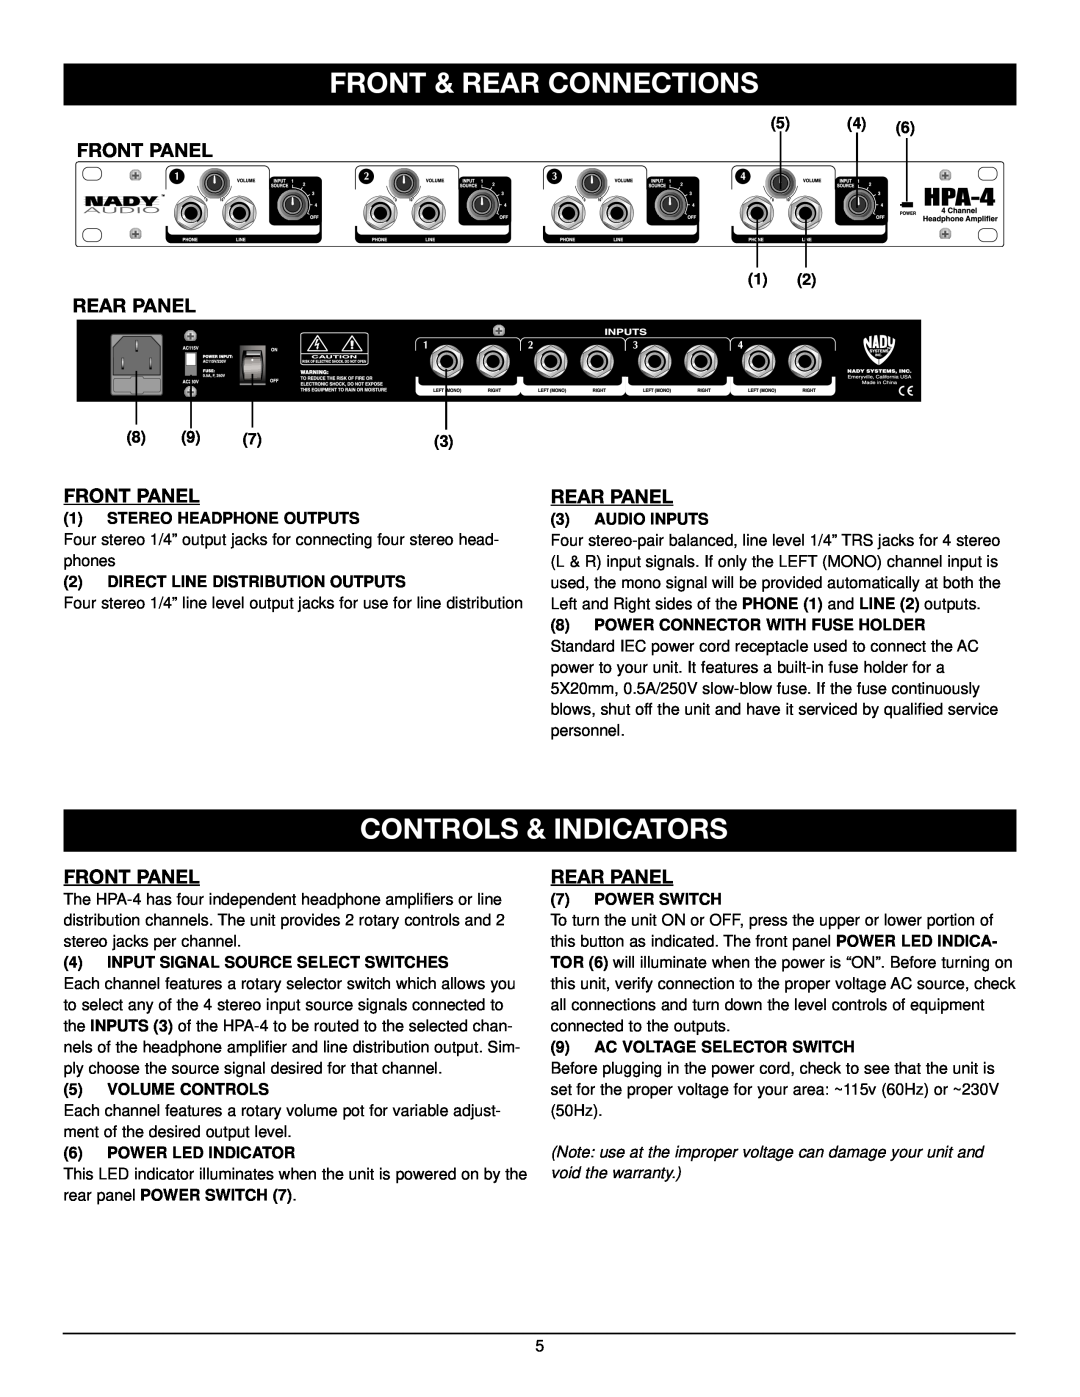 Nady Systems HPA-4 manual Front & Rear Connections, Controls & Indicators, Front Panel, Rear Panel 